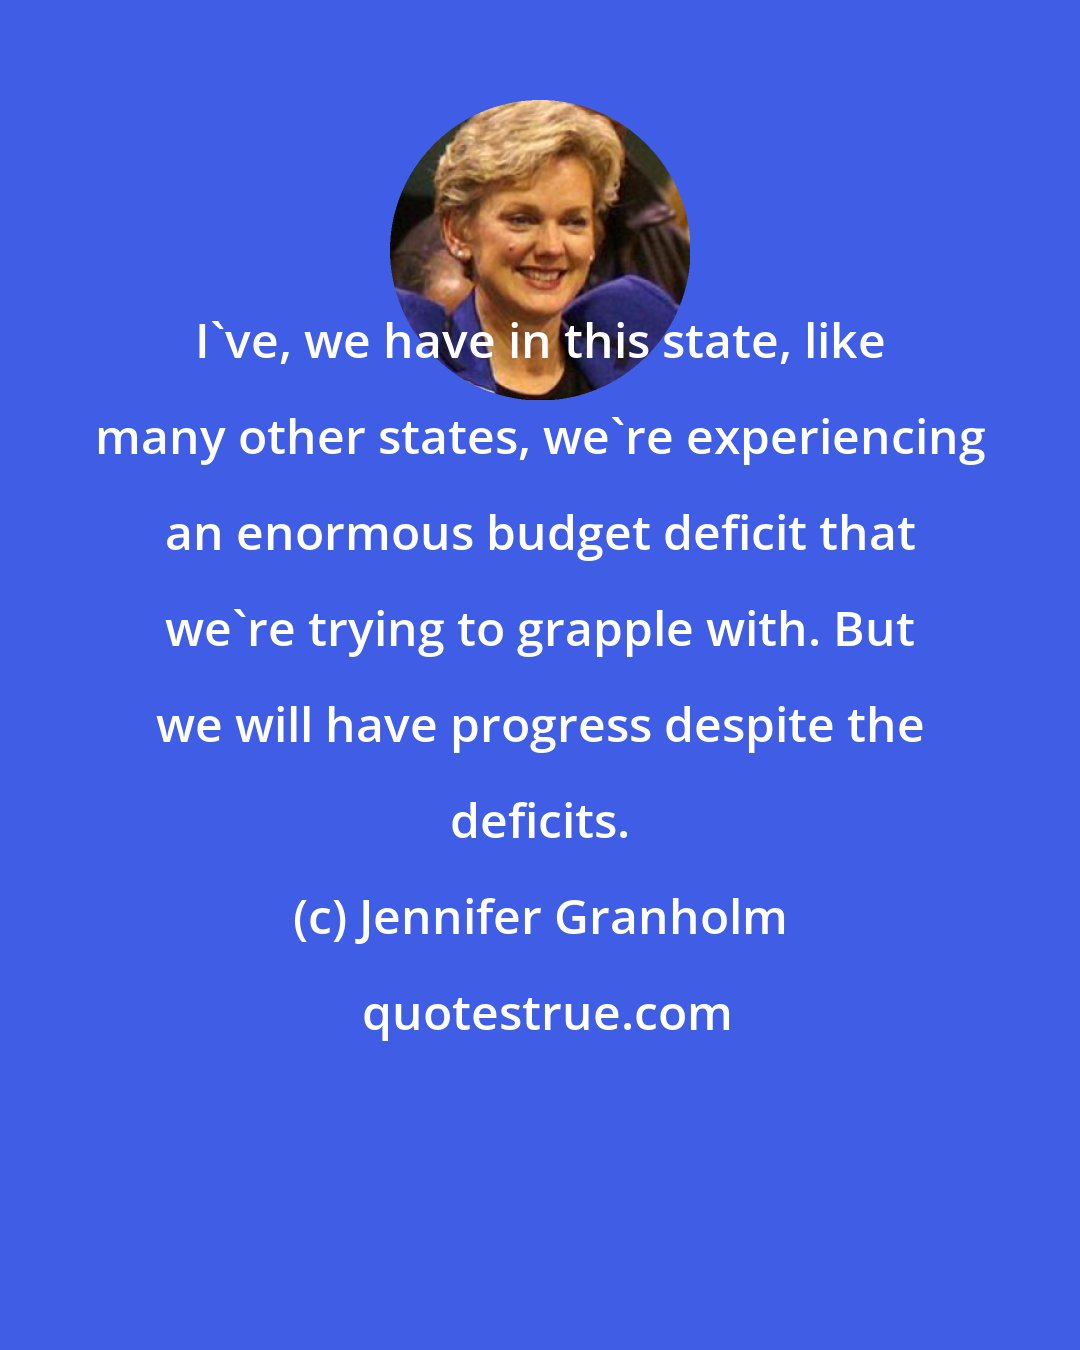 Jennifer Granholm: I've, we have in this state, like many other states, we're experiencing an enormous budget deficit that we're trying to grapple with. But we will have progress despite the deficits.